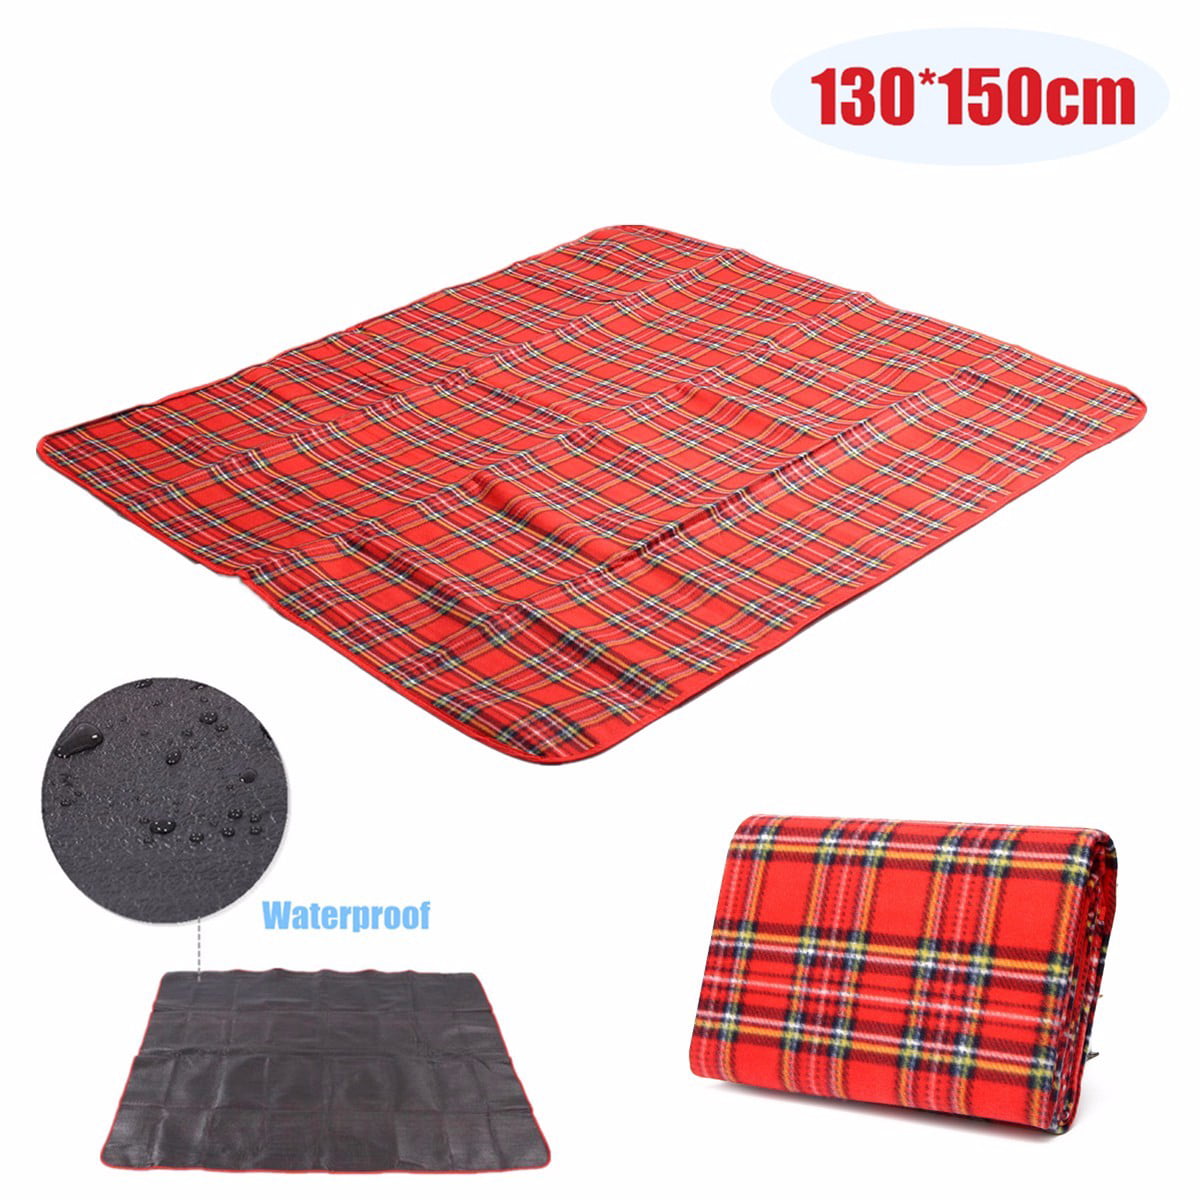 Extra Large Outdoor Waterproof Blue and White Plaid Picnic BlanketFleece 